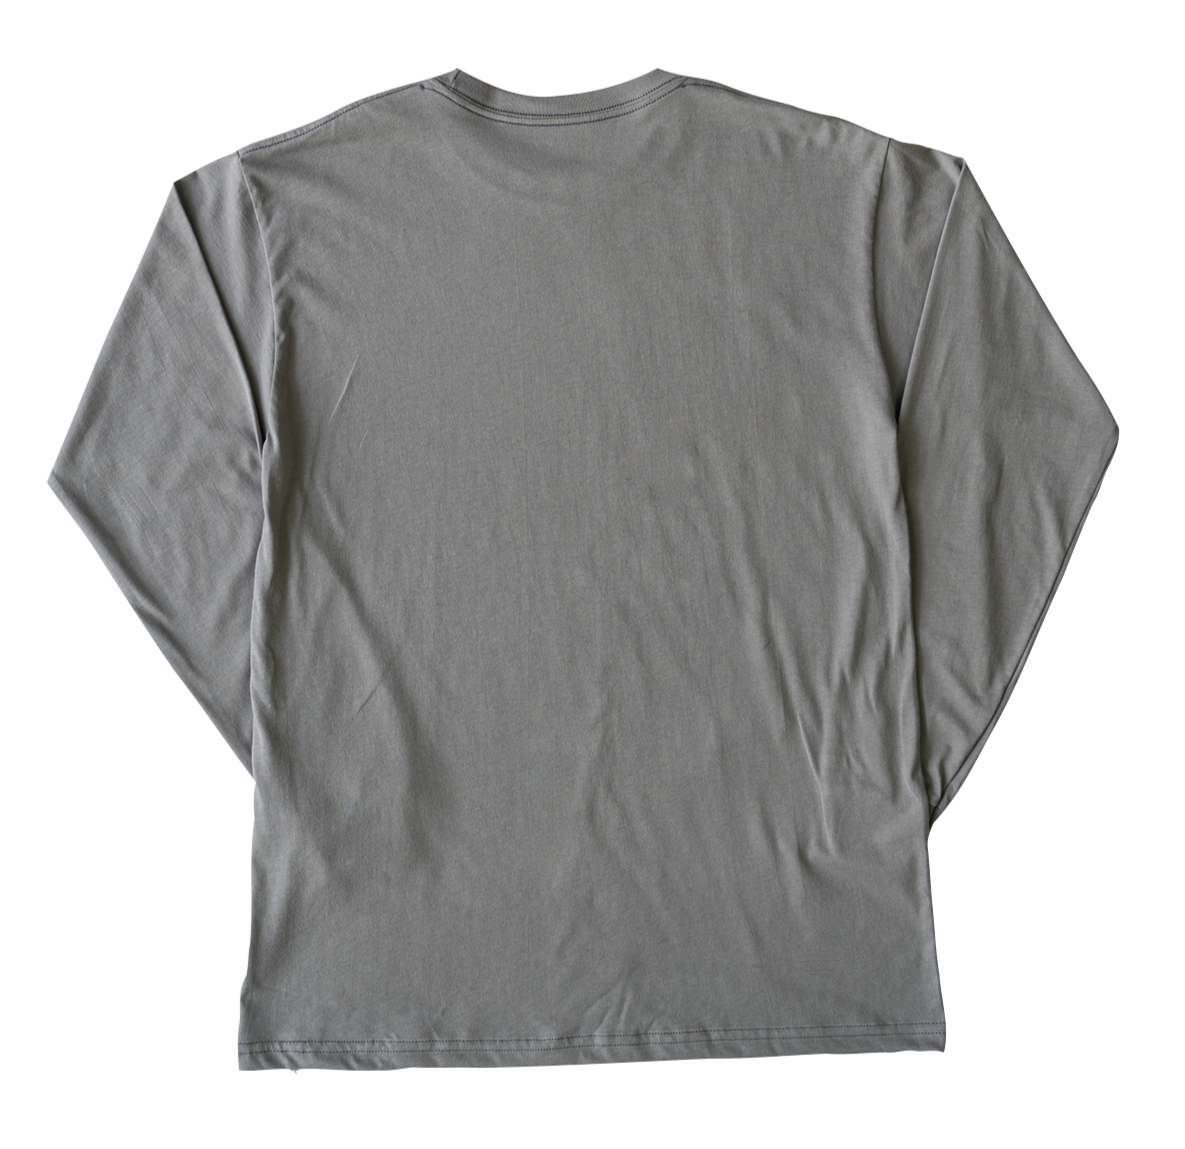 Nature Backs Long Sleeve 100% Organic Cotton T-Shirt | Minimalist Slate Long Sleeve made with Eco-Friendly Fibers Sustainably made in the USA 